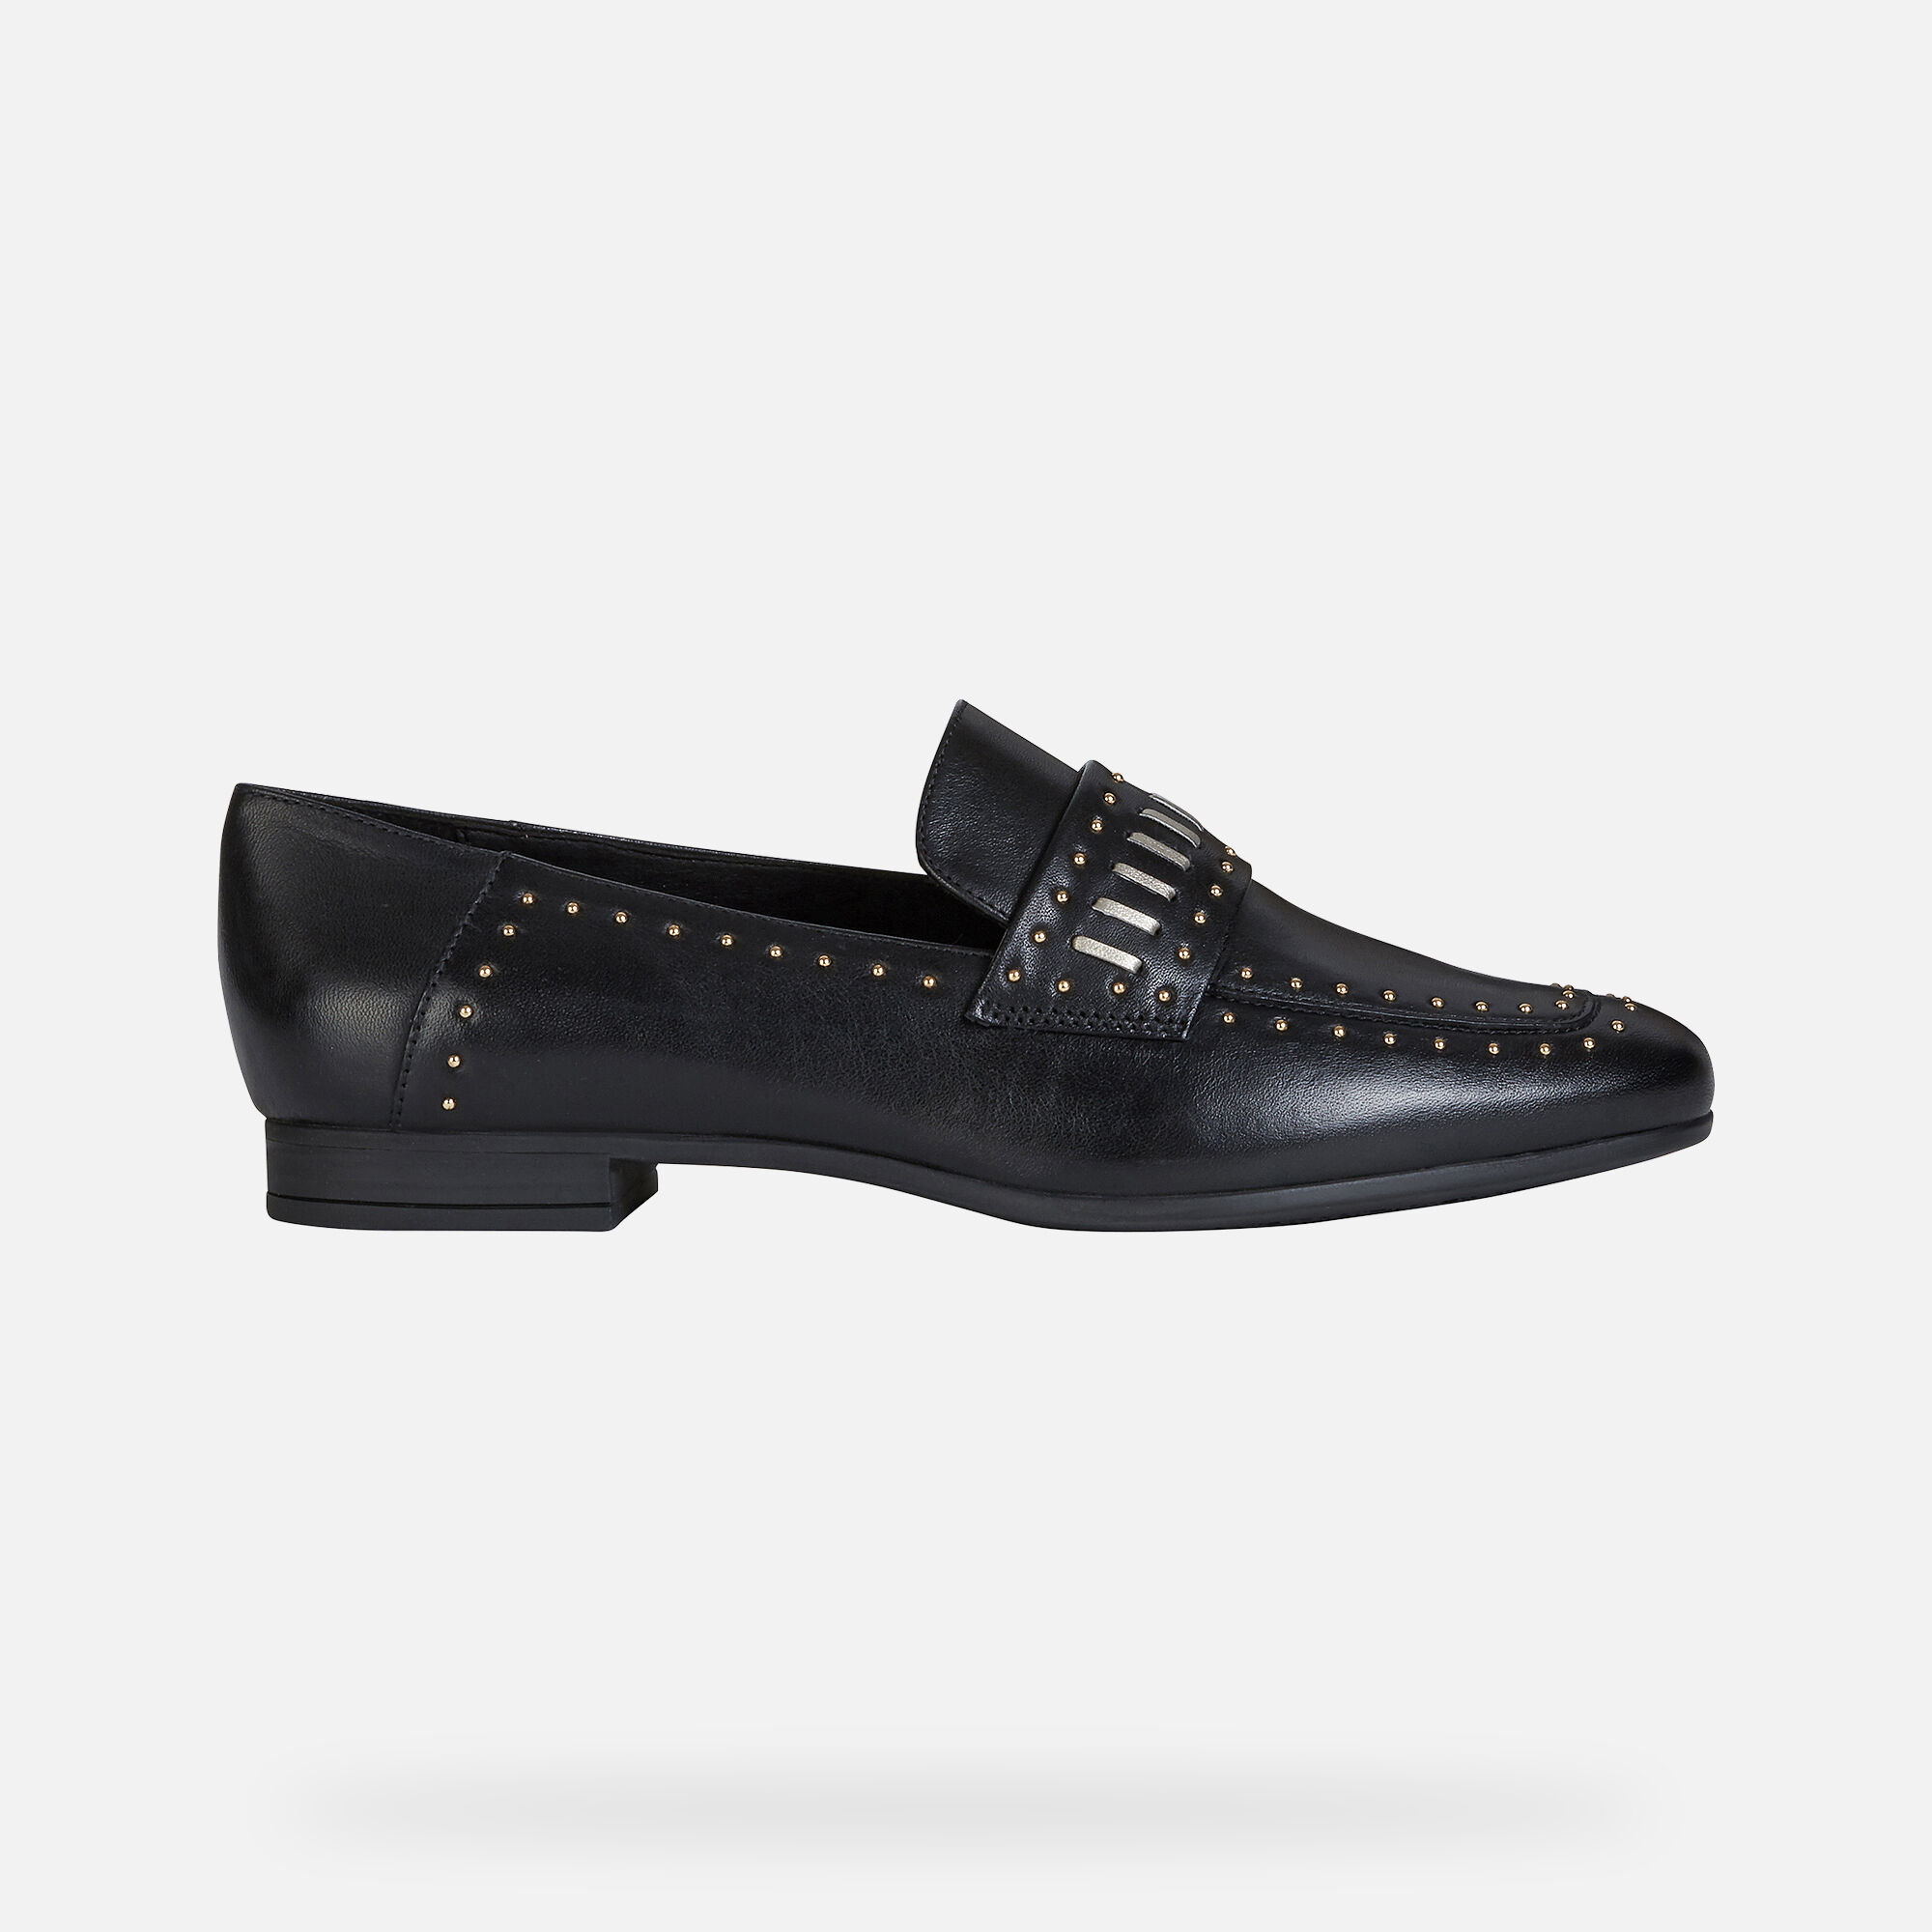 Geox MARLYNA Woman: Black Loafers 